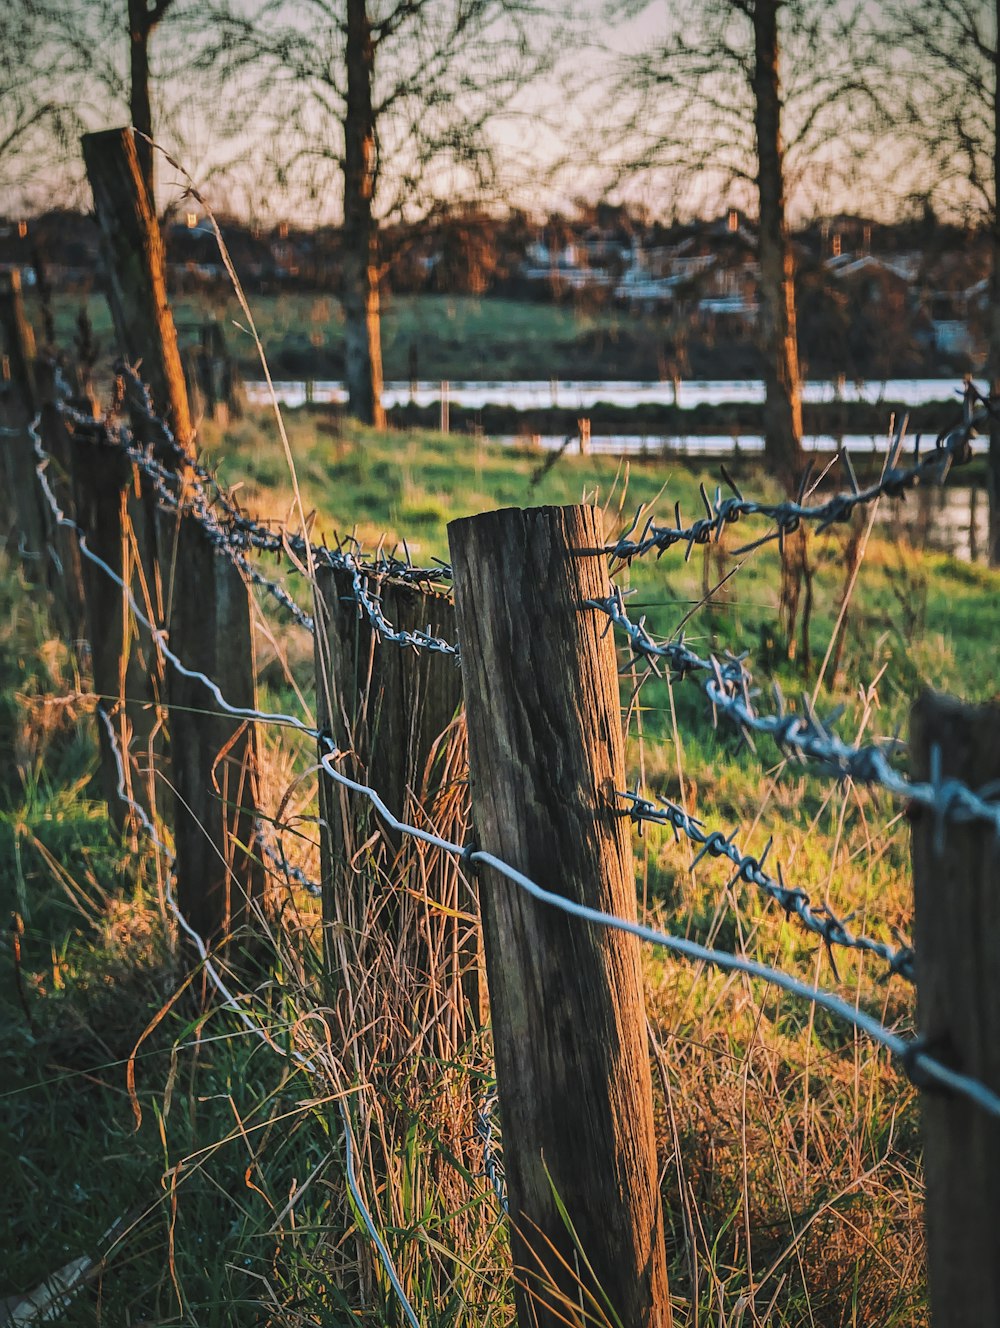 a barbed wire fence in a grassy field